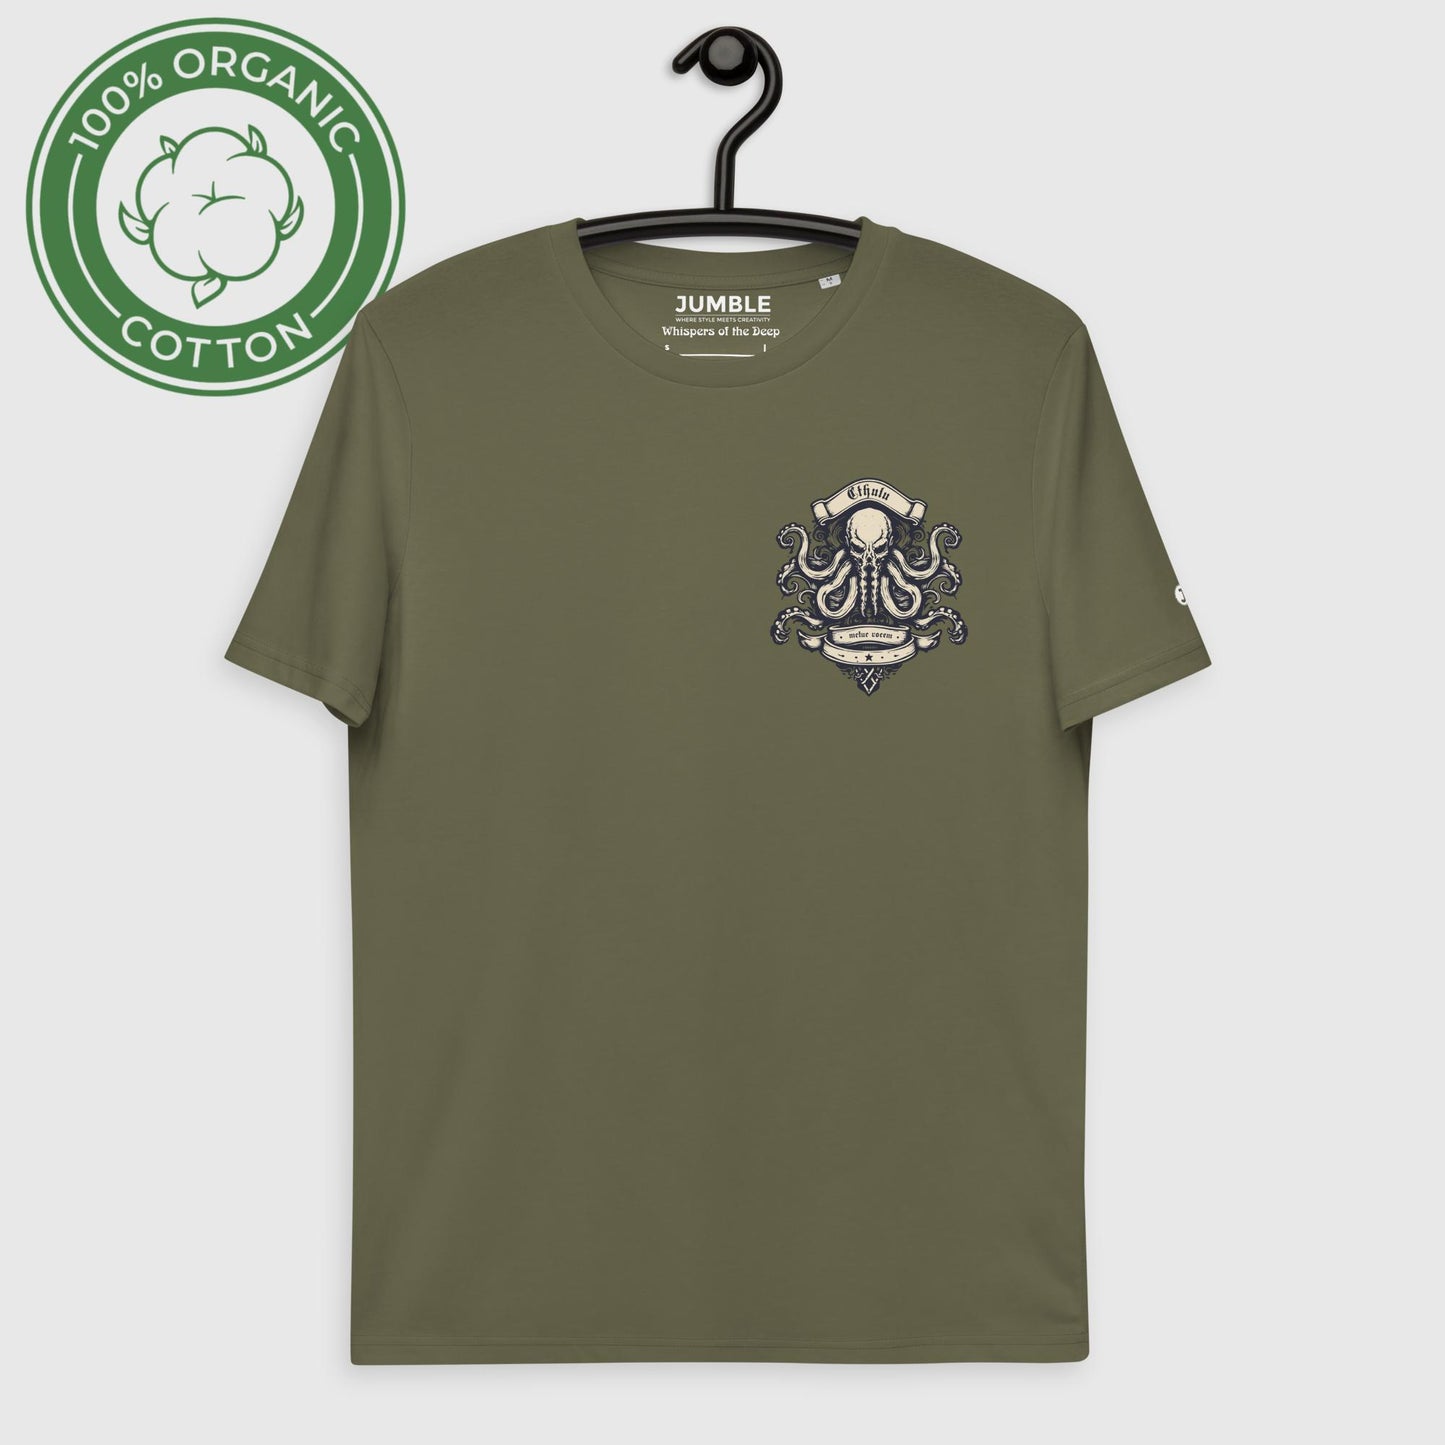 Whispers of the Deep Unisex organic cotton t-shirt in khaki, displayed on a hanger